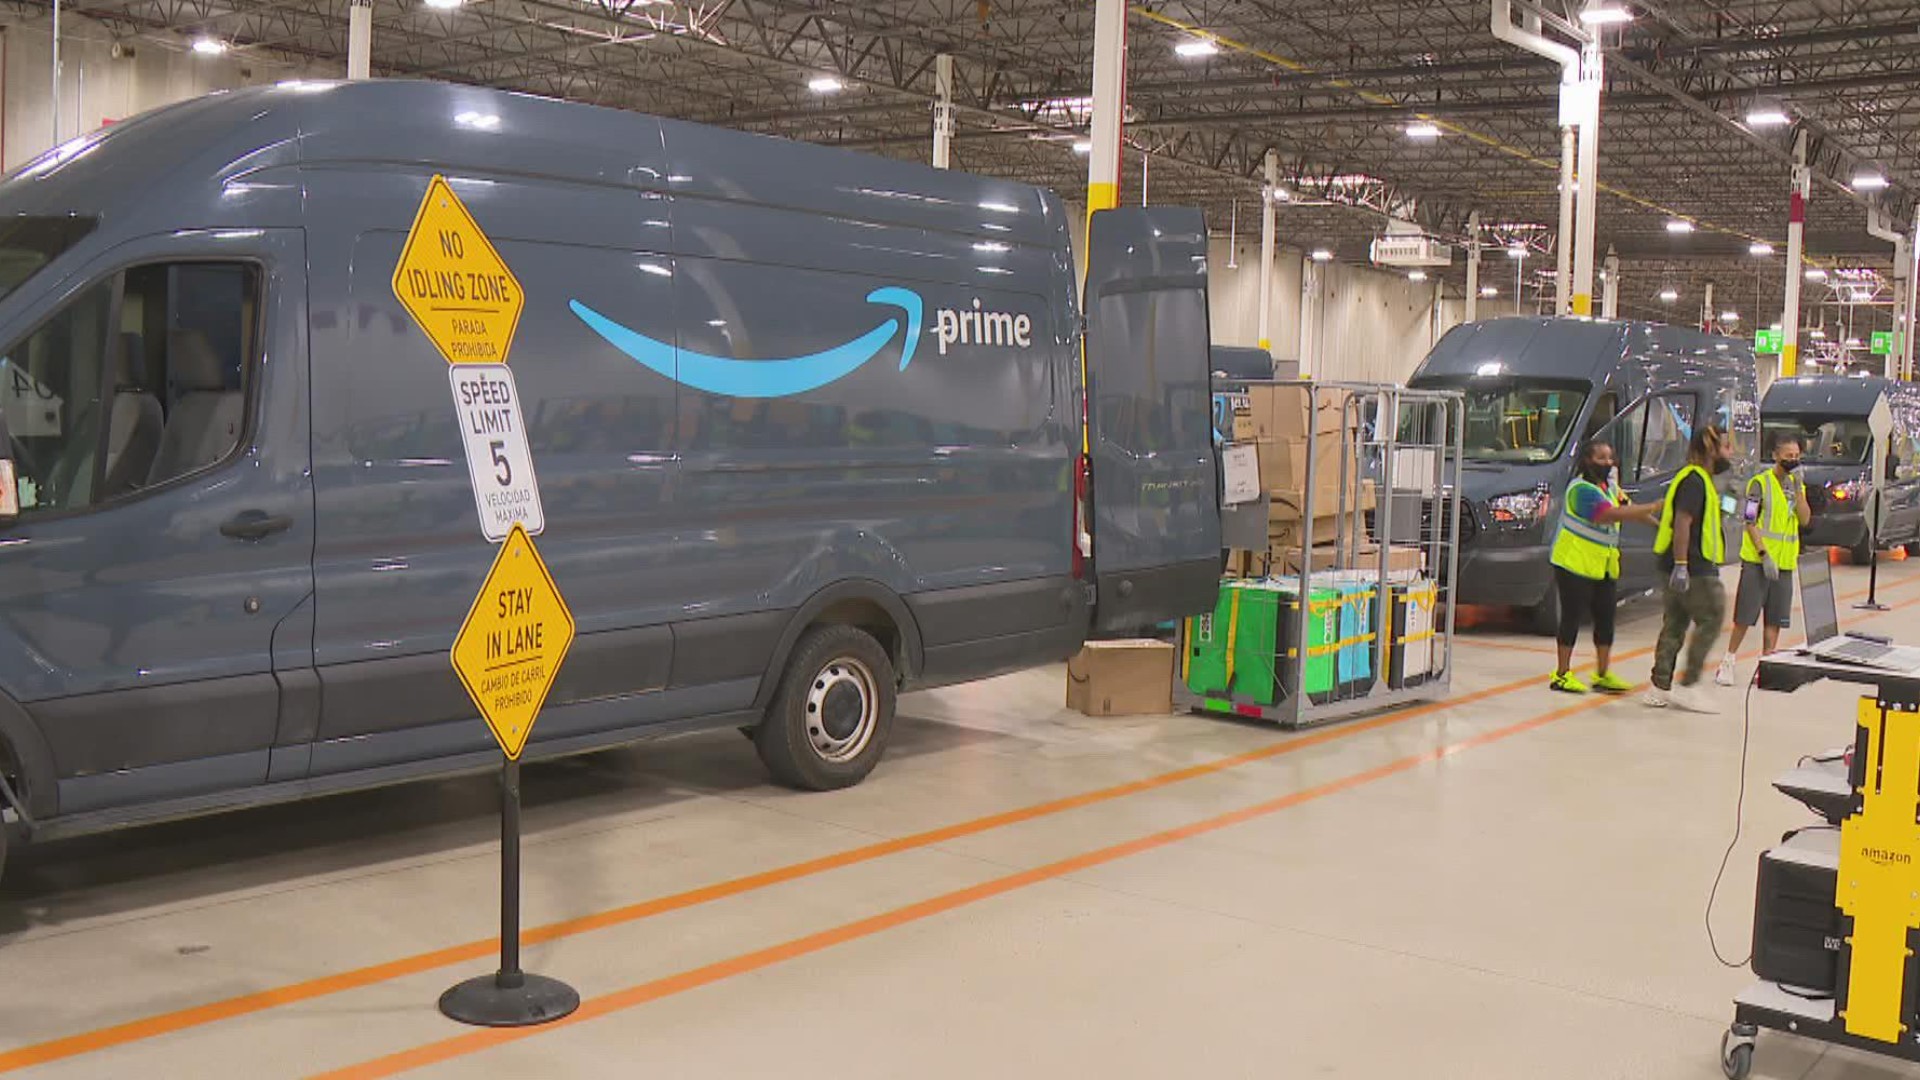 We're getting a look inside the new Amazon delivery station on the northwest side of Indianapolis.